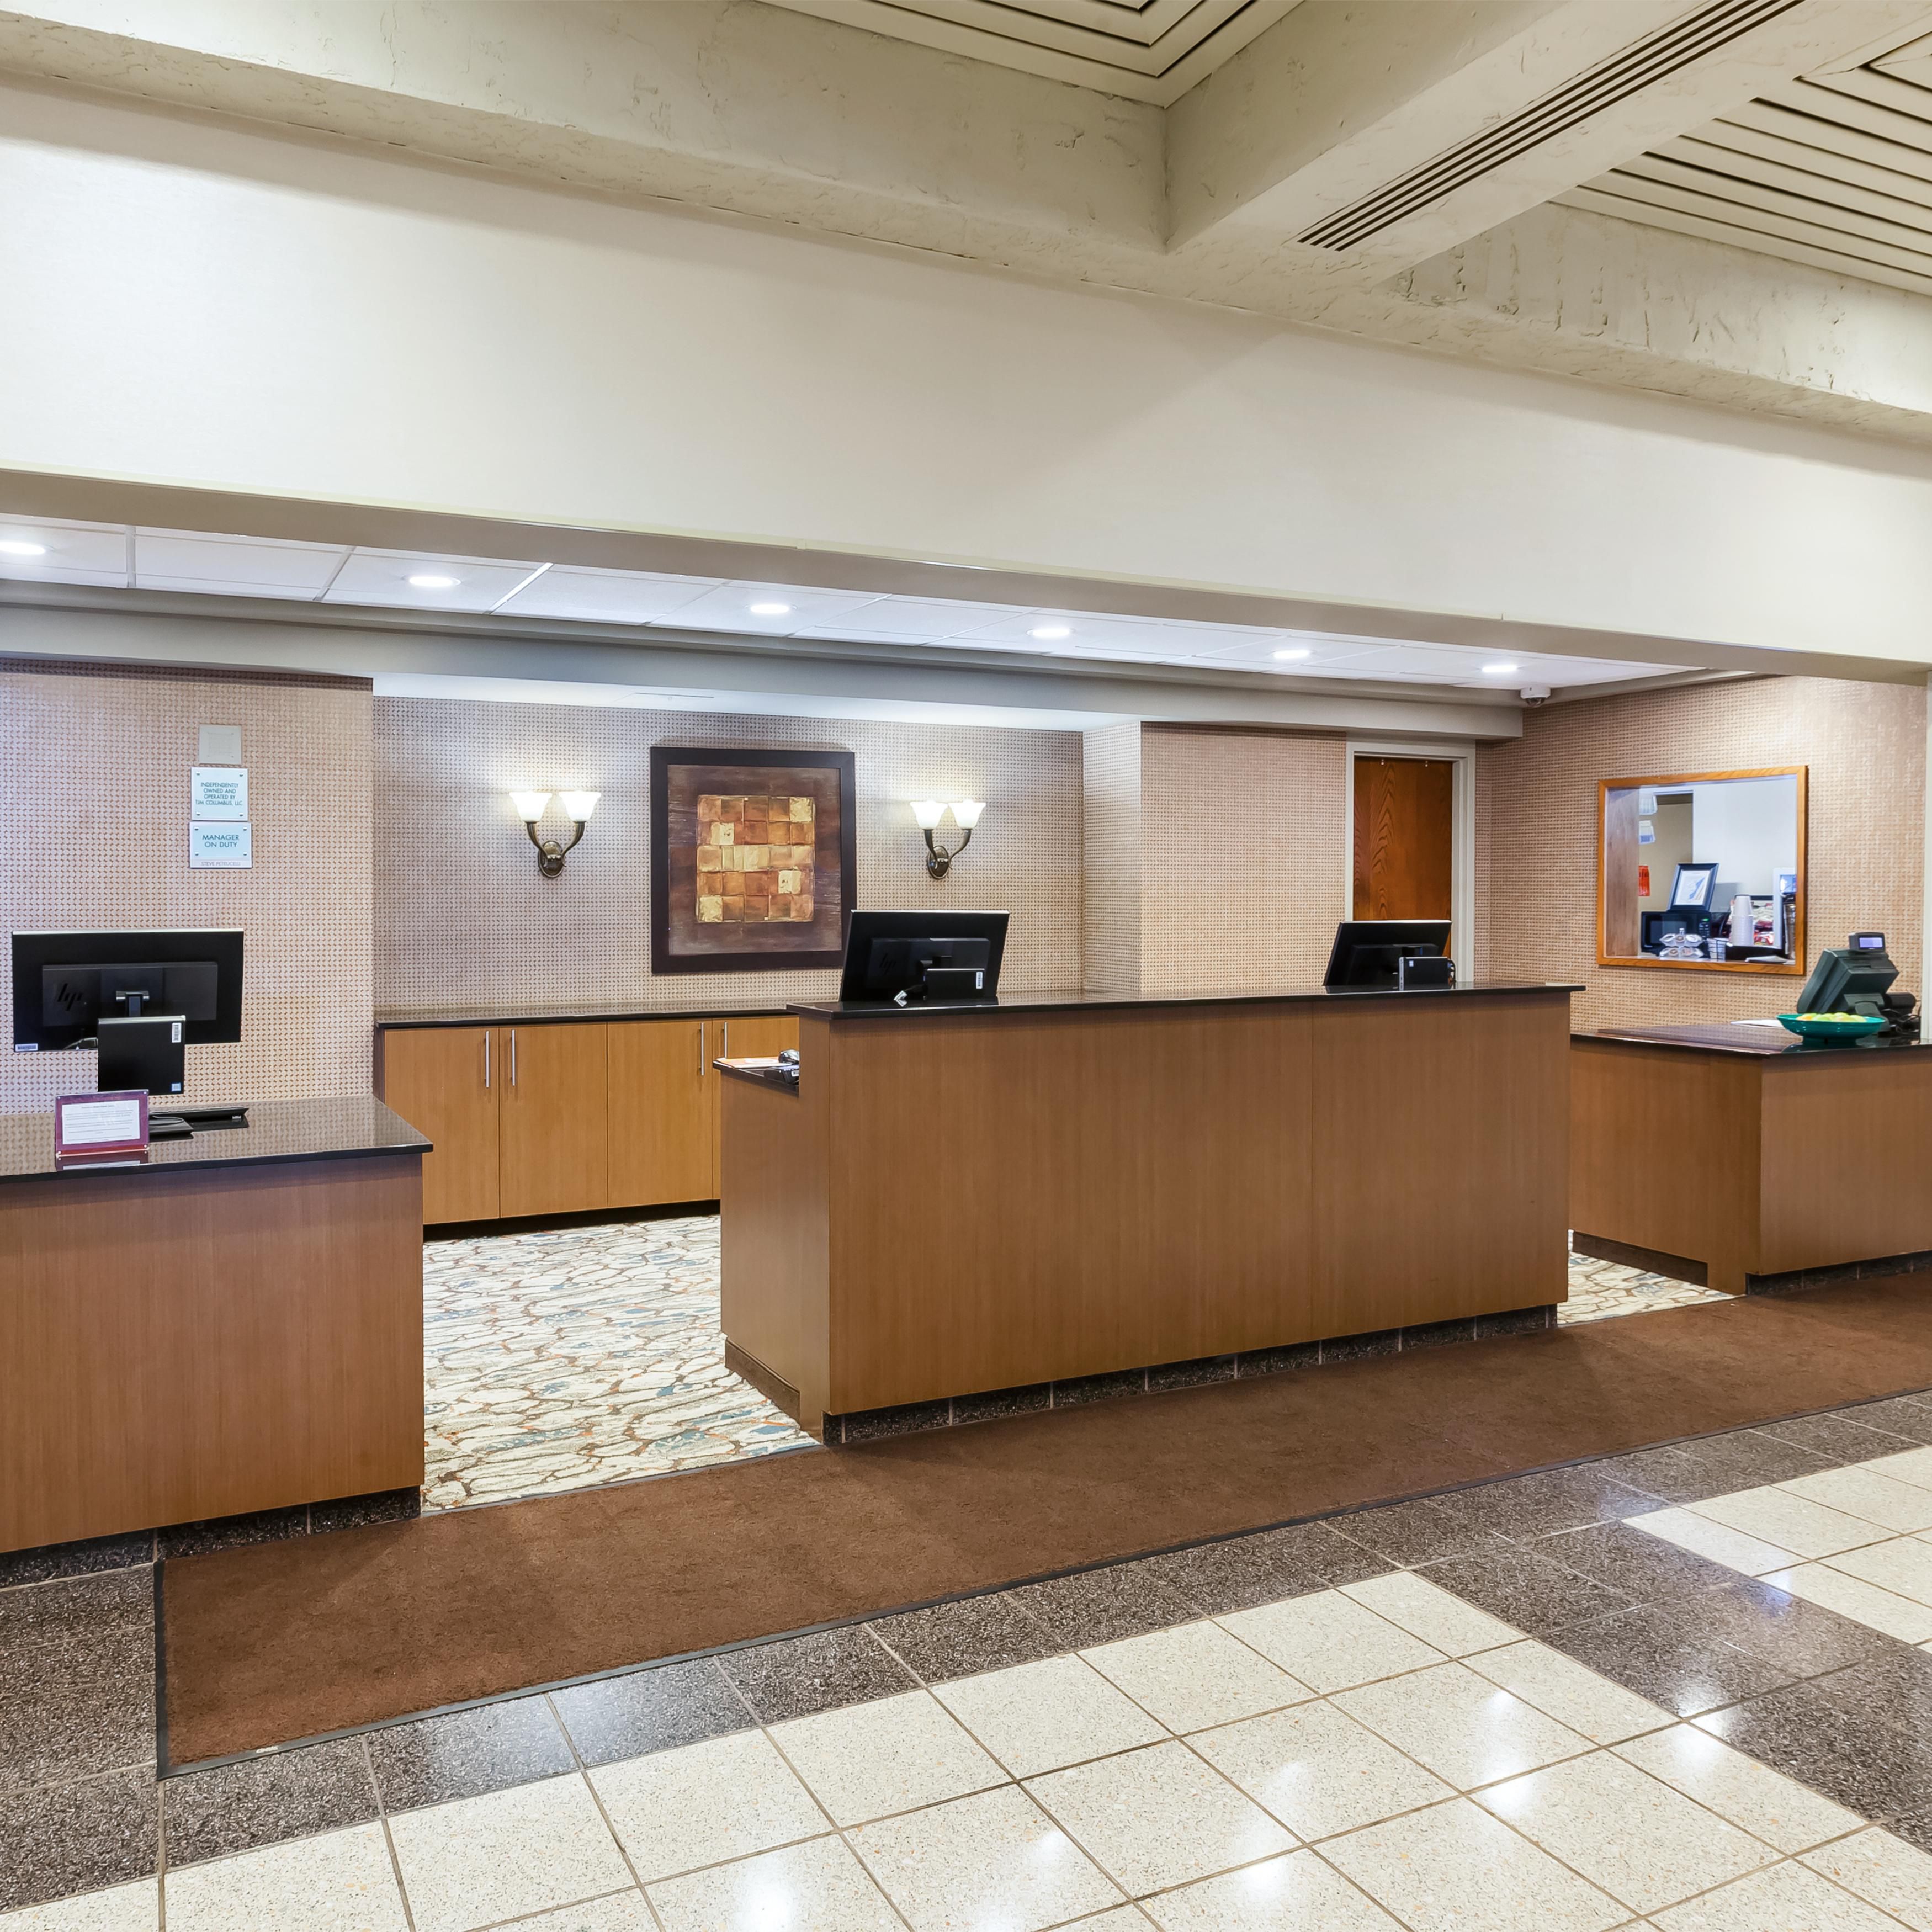 Welcome to the Crowne Plaza Columbus North Worthington